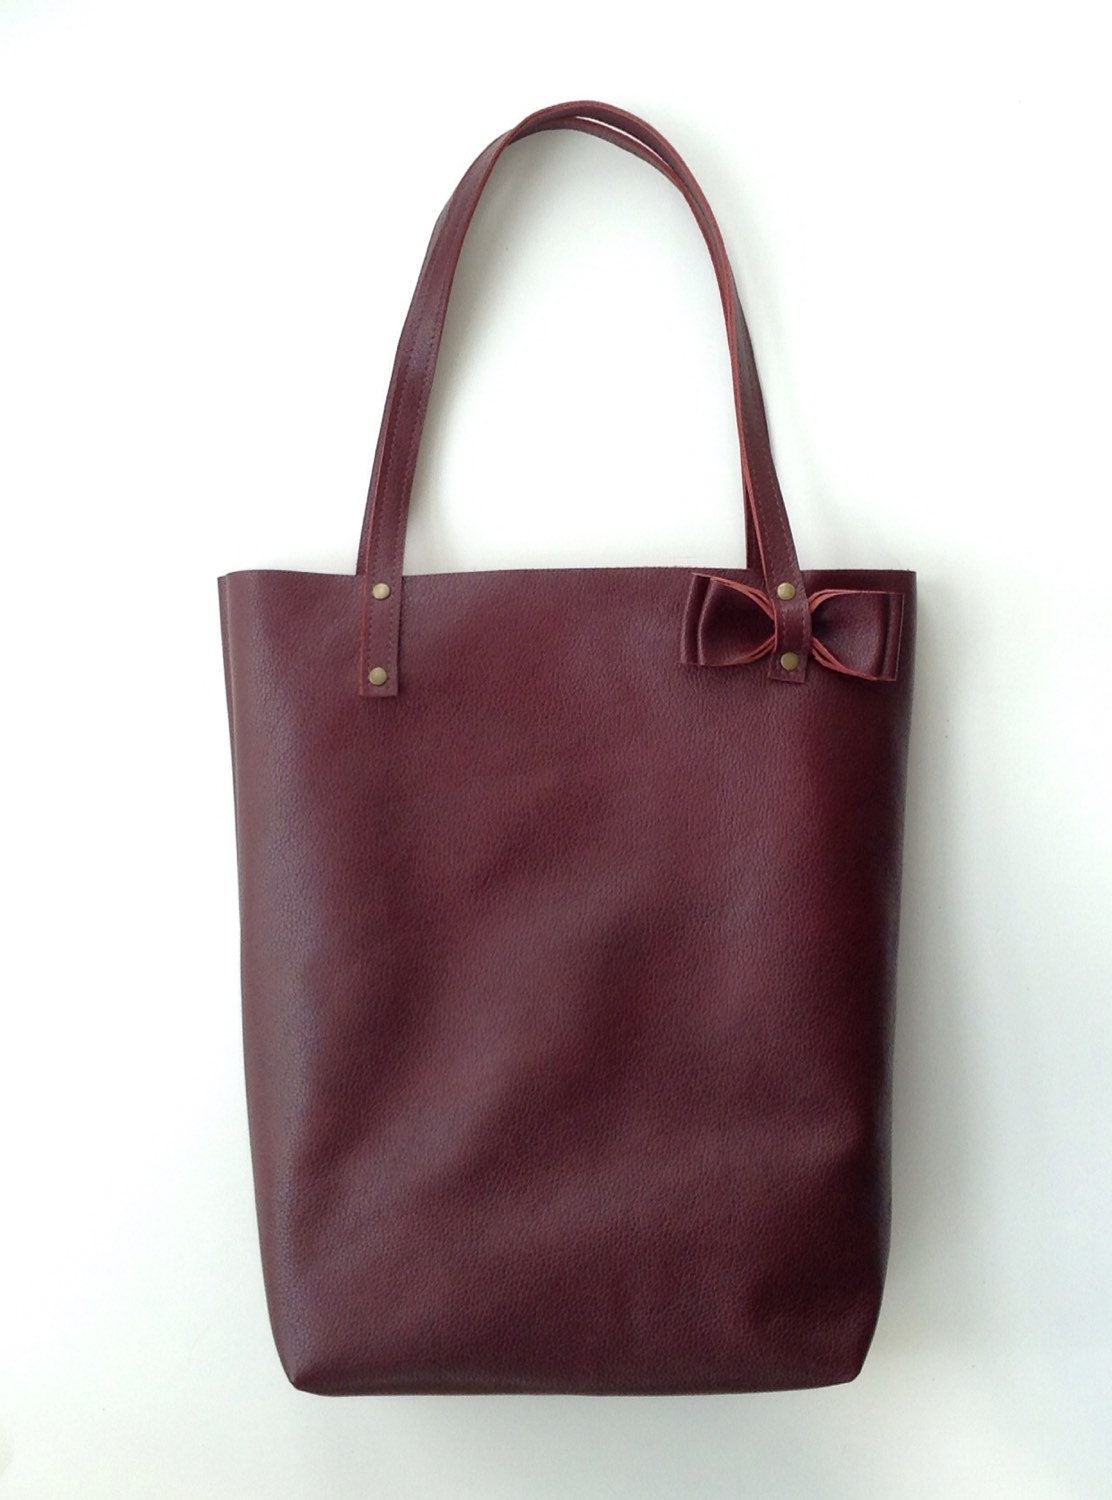 Burgundy Red leather tote bag // Simple market tote bag with